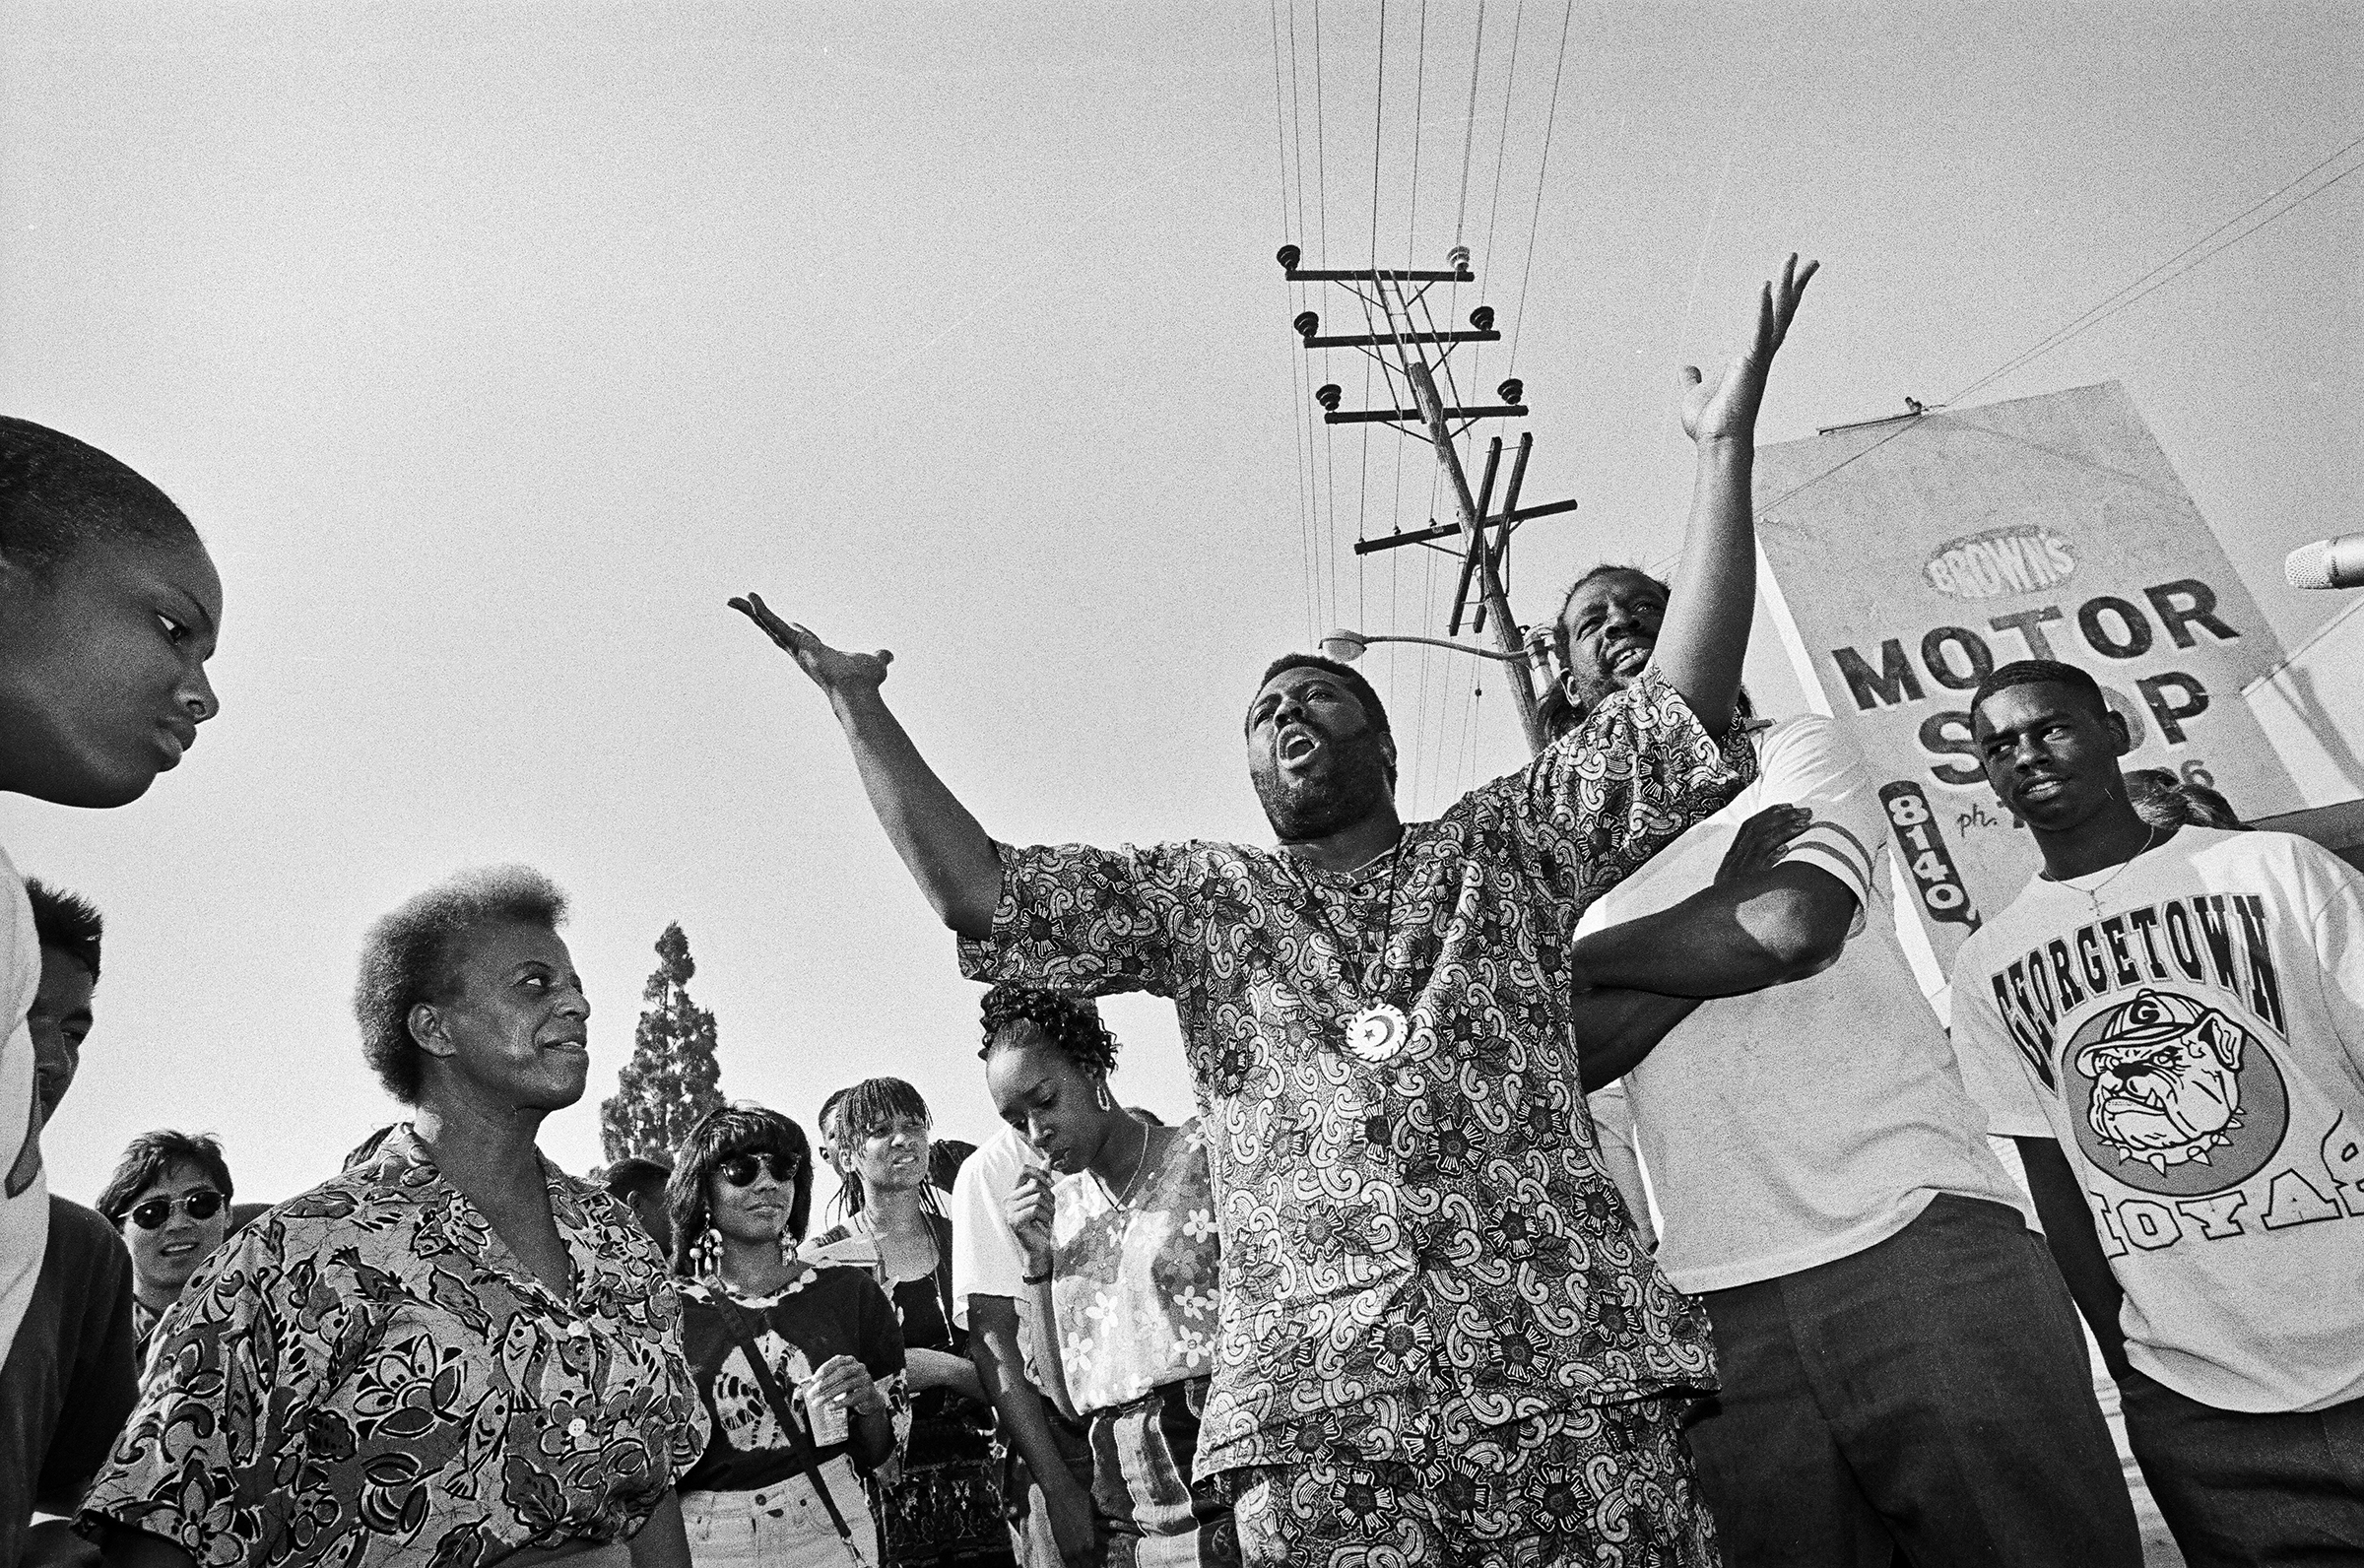 After days of rioting, South Central residents gather to ask their fellow residents to stop the violence. (Ted Soqui—Corbis/Getty Images)